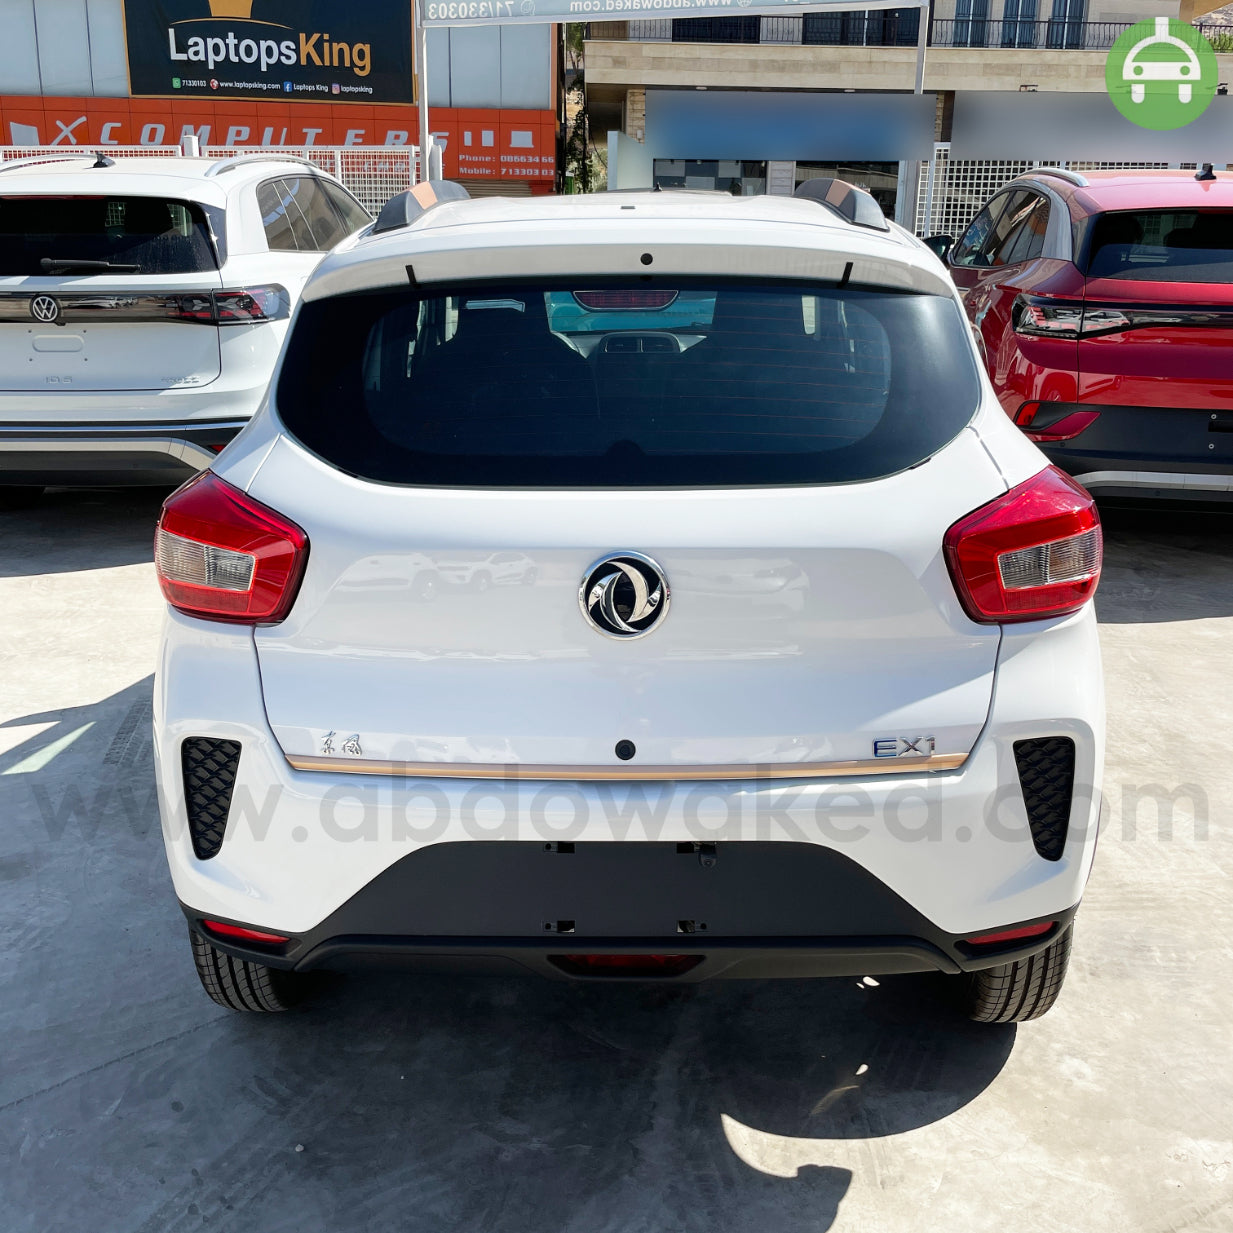 Dongfeng EX1 2022 White Color 300km Range/Charge Fully Electric Car (New - 0KM)